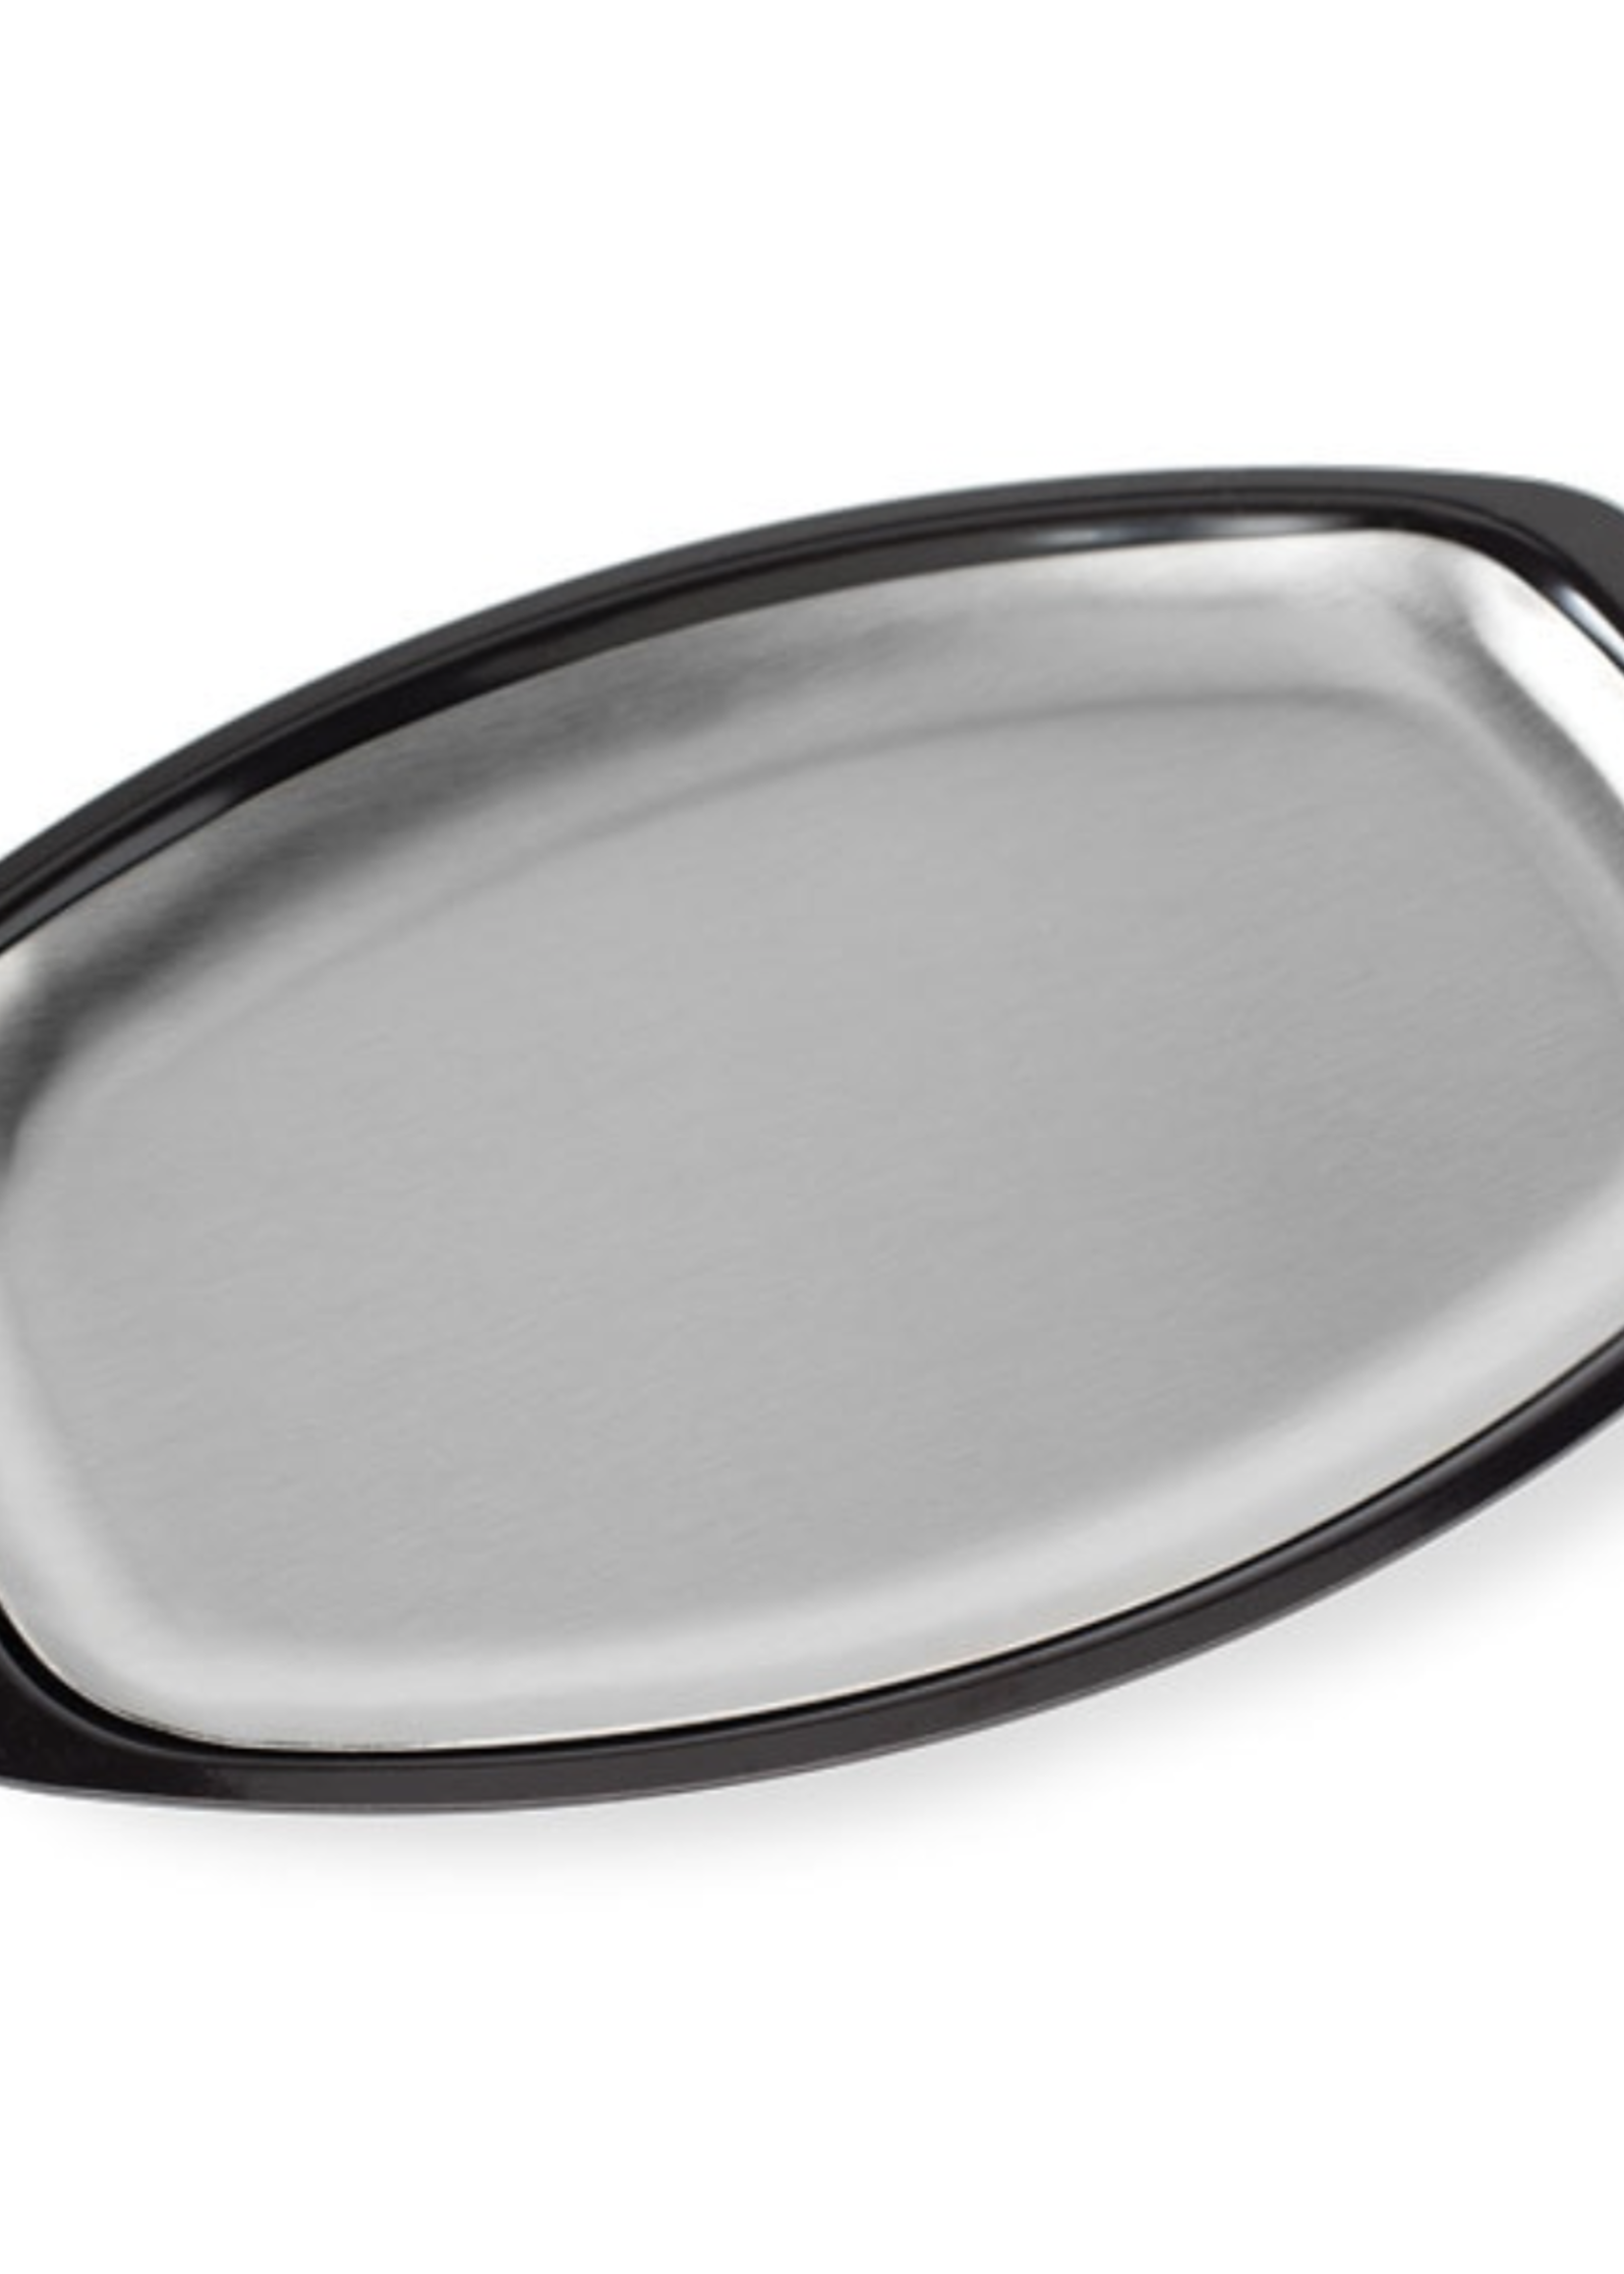 Nordic Ware Stainless Steel Family Size Grill n Serve Plate